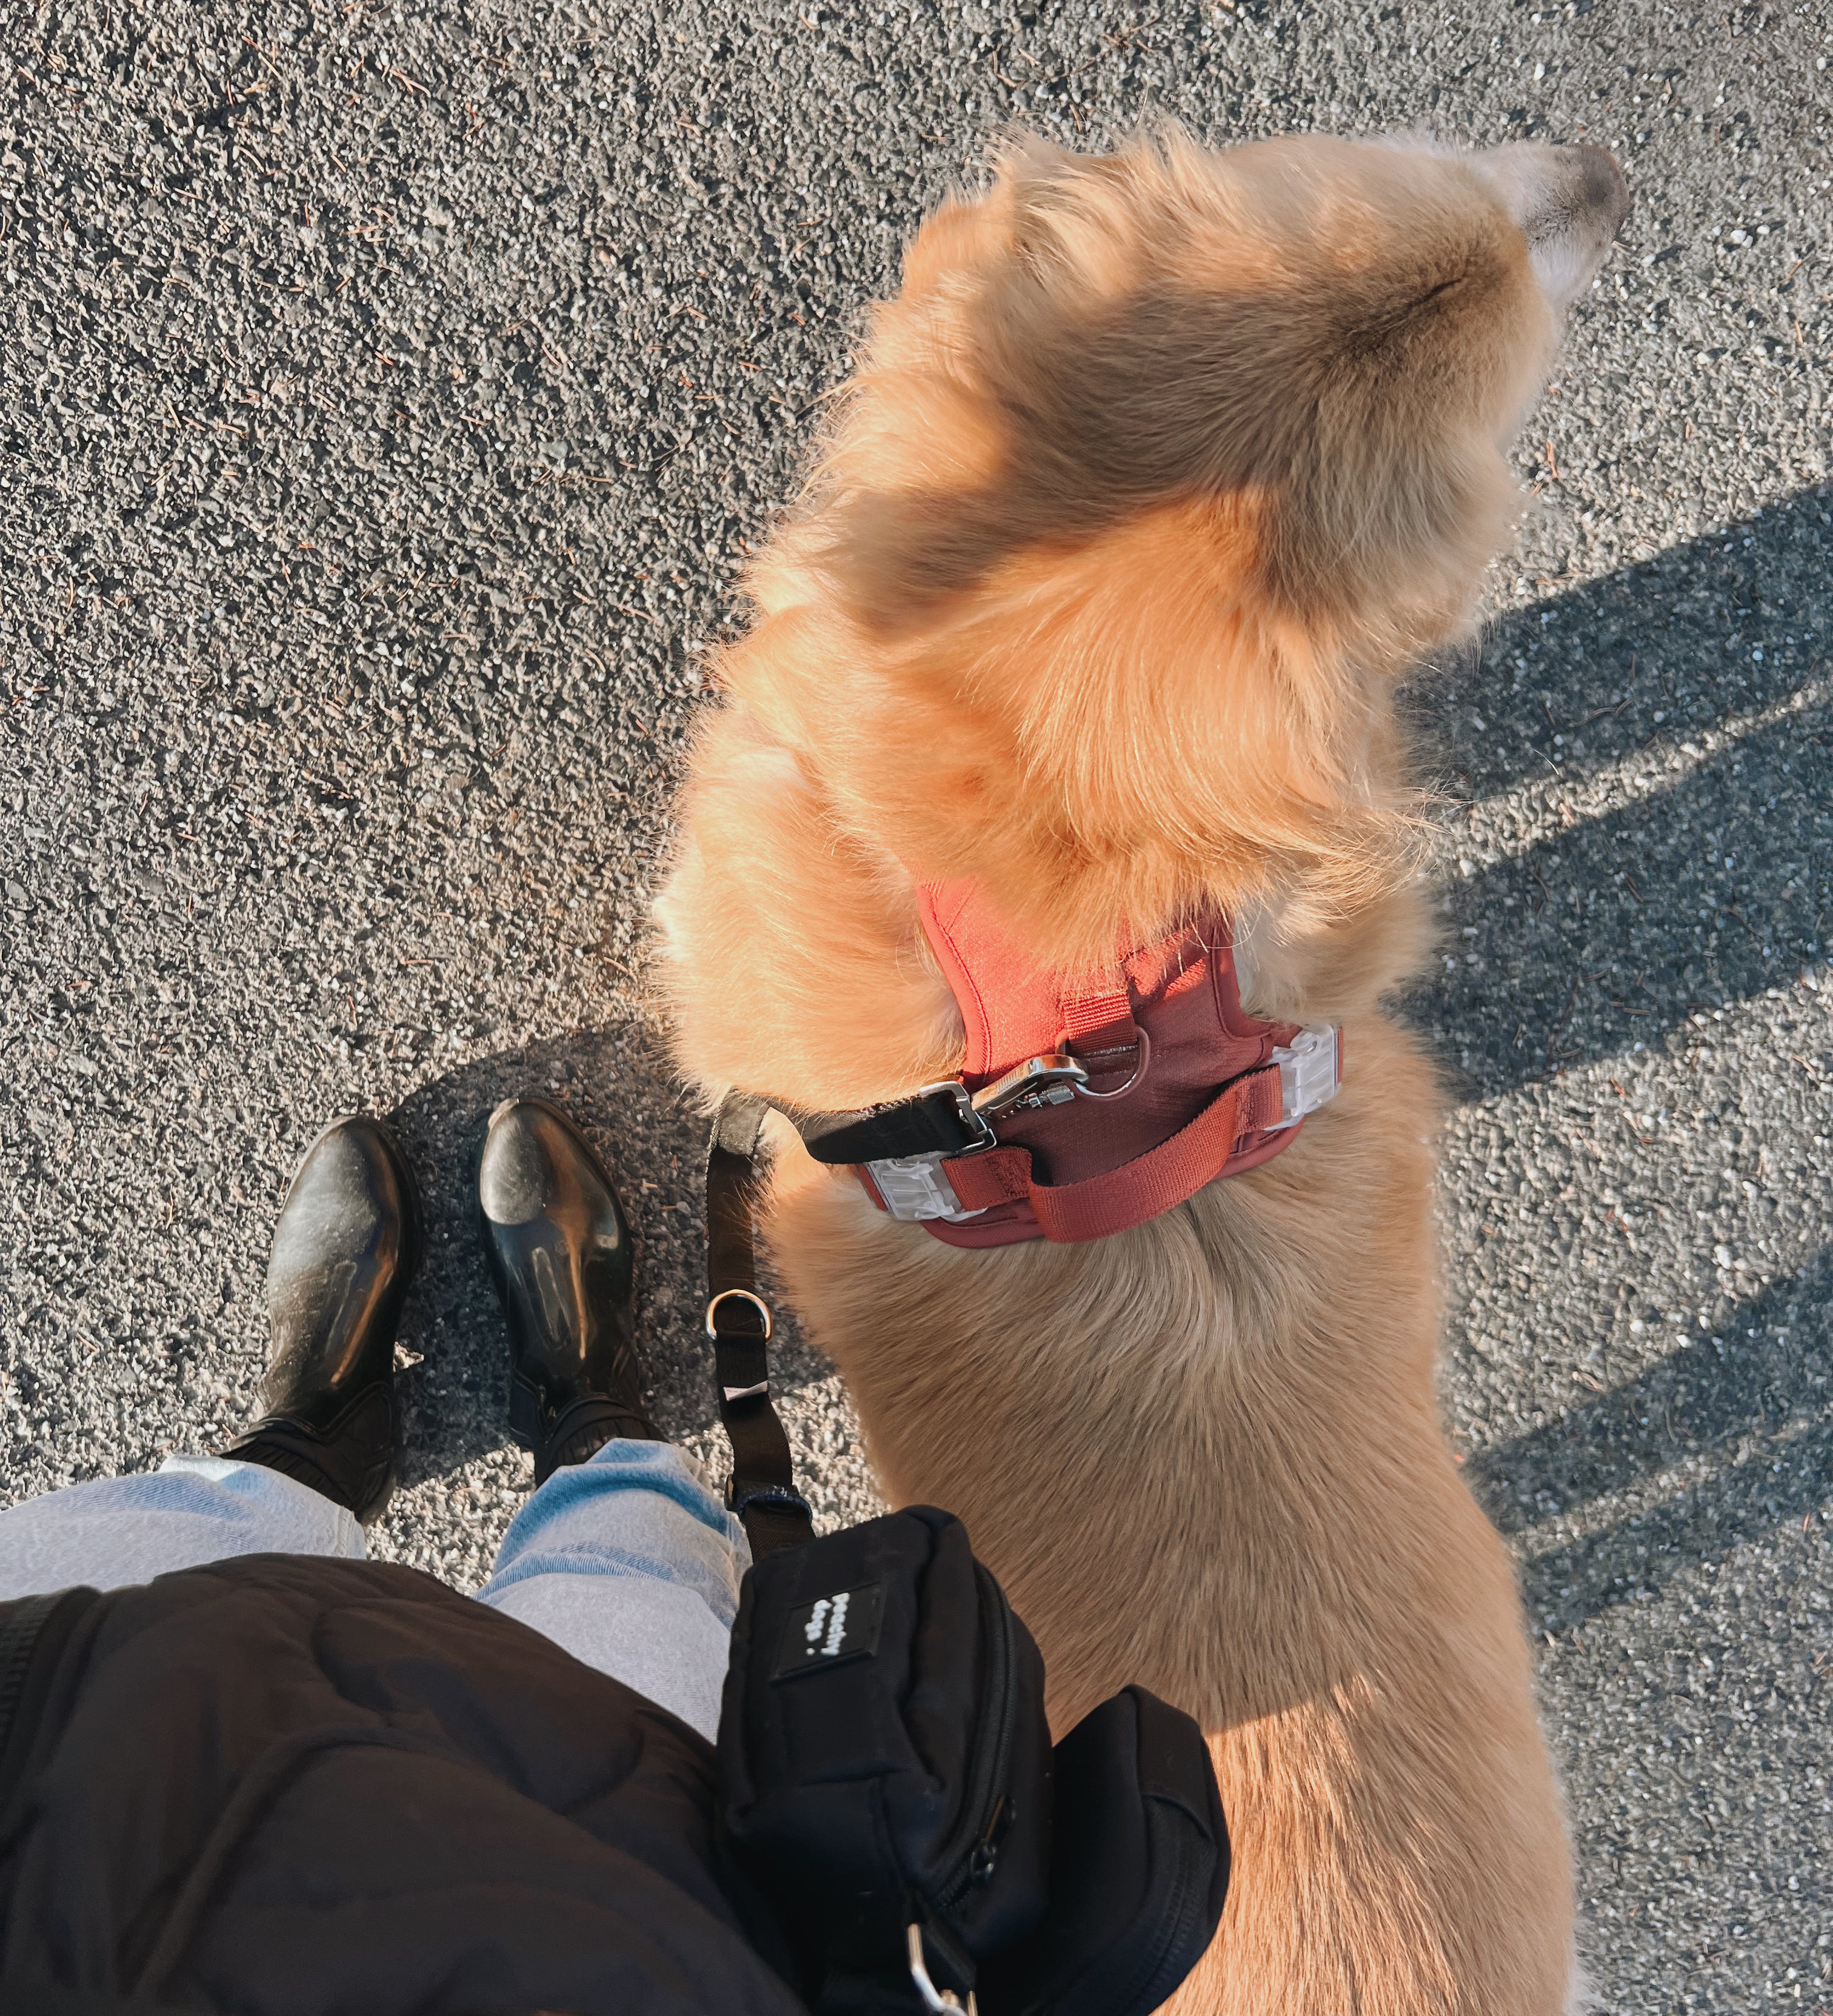 Leash Etiquette 101: A Guide to Dog Walking and Exploring